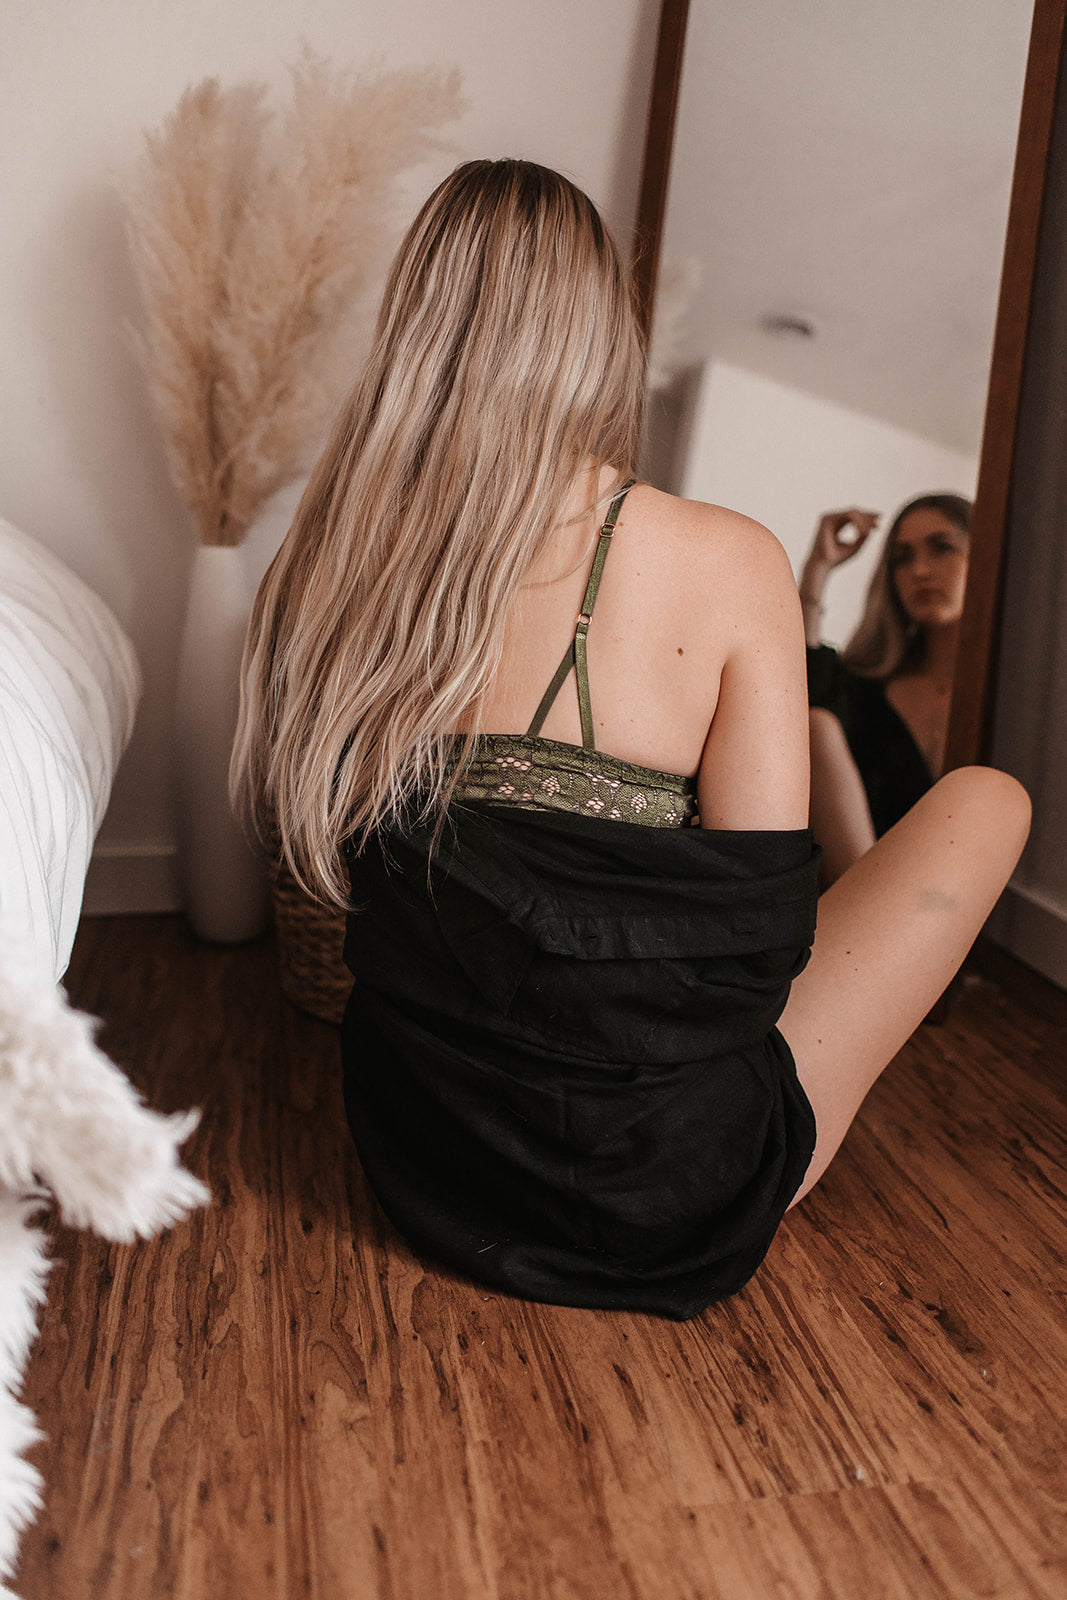 Bralette Subscription – Layered With Lace